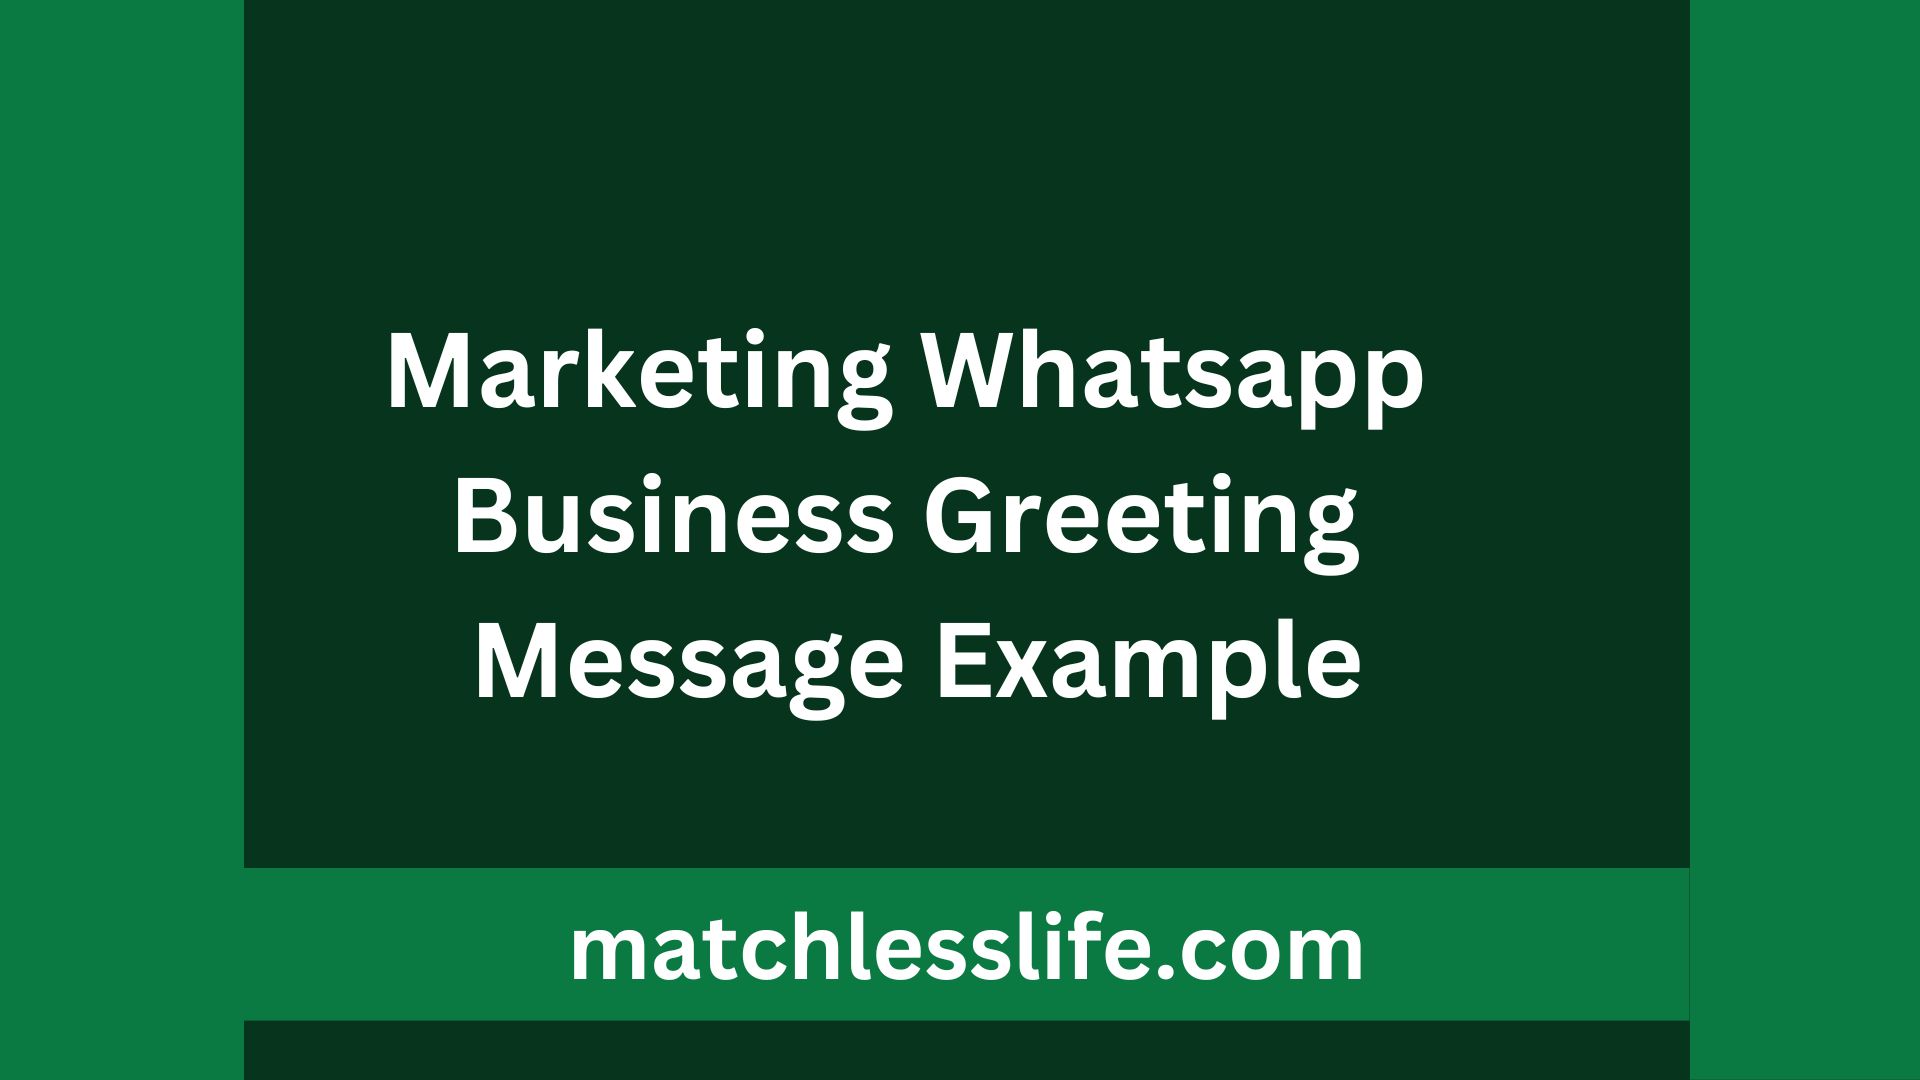 Marketing Whatsapp Business Greeting Message Example